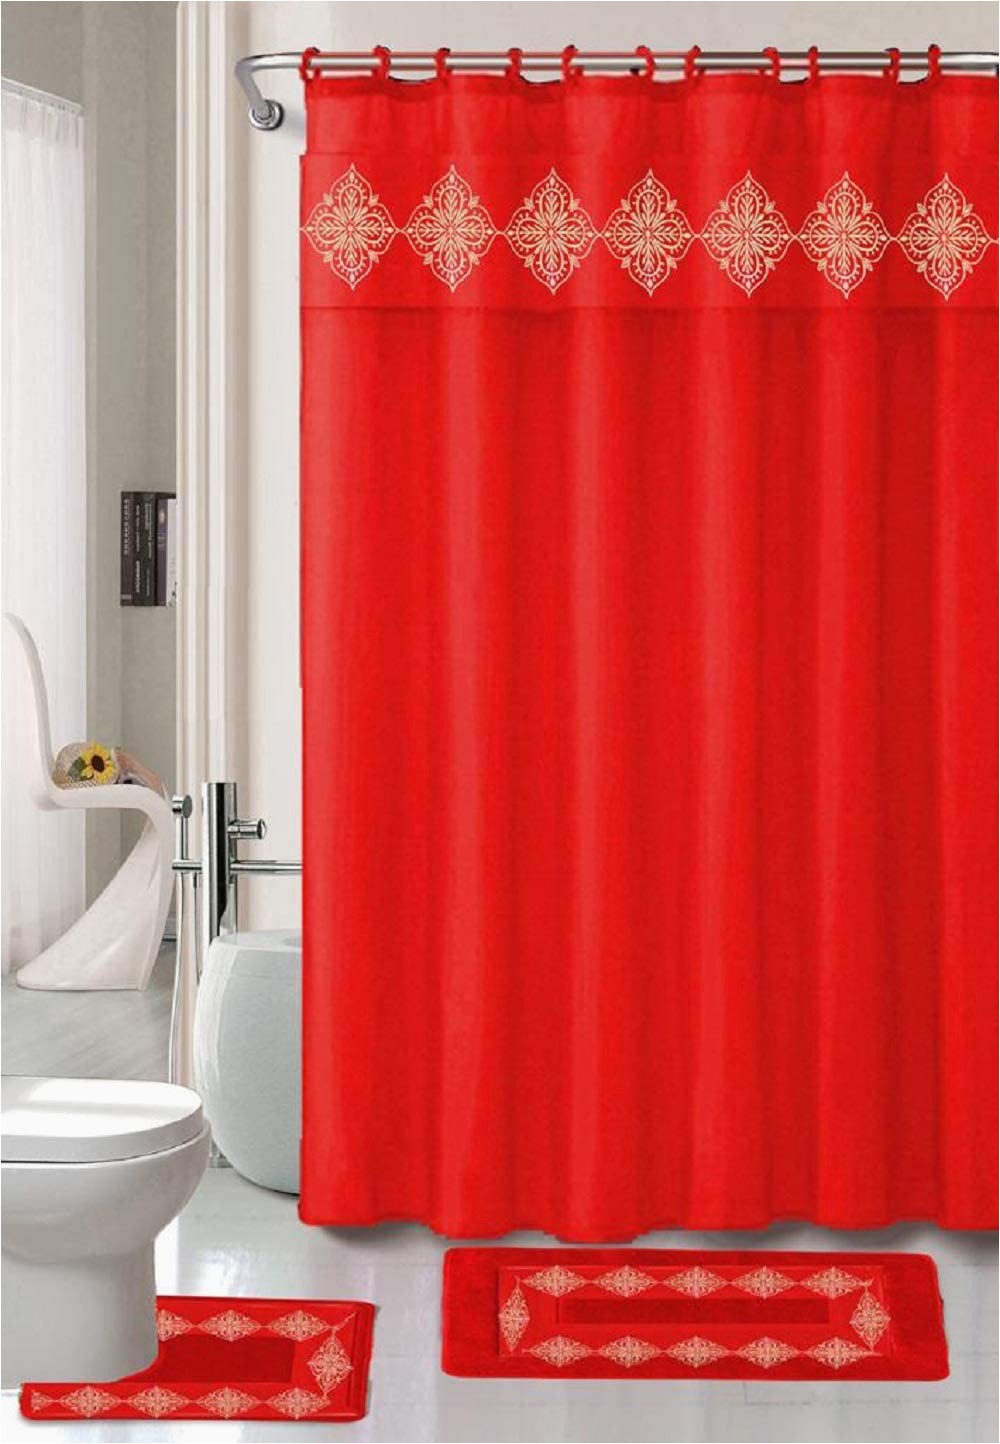 Shower Curtains with Matching Bath Rugs 4 Piece Bathroom Rugs Set Non Slip Red Gold Color Bath Rug toilet Contour Mat with Fabric Shower Curtain and Matching Rings Daisy Red